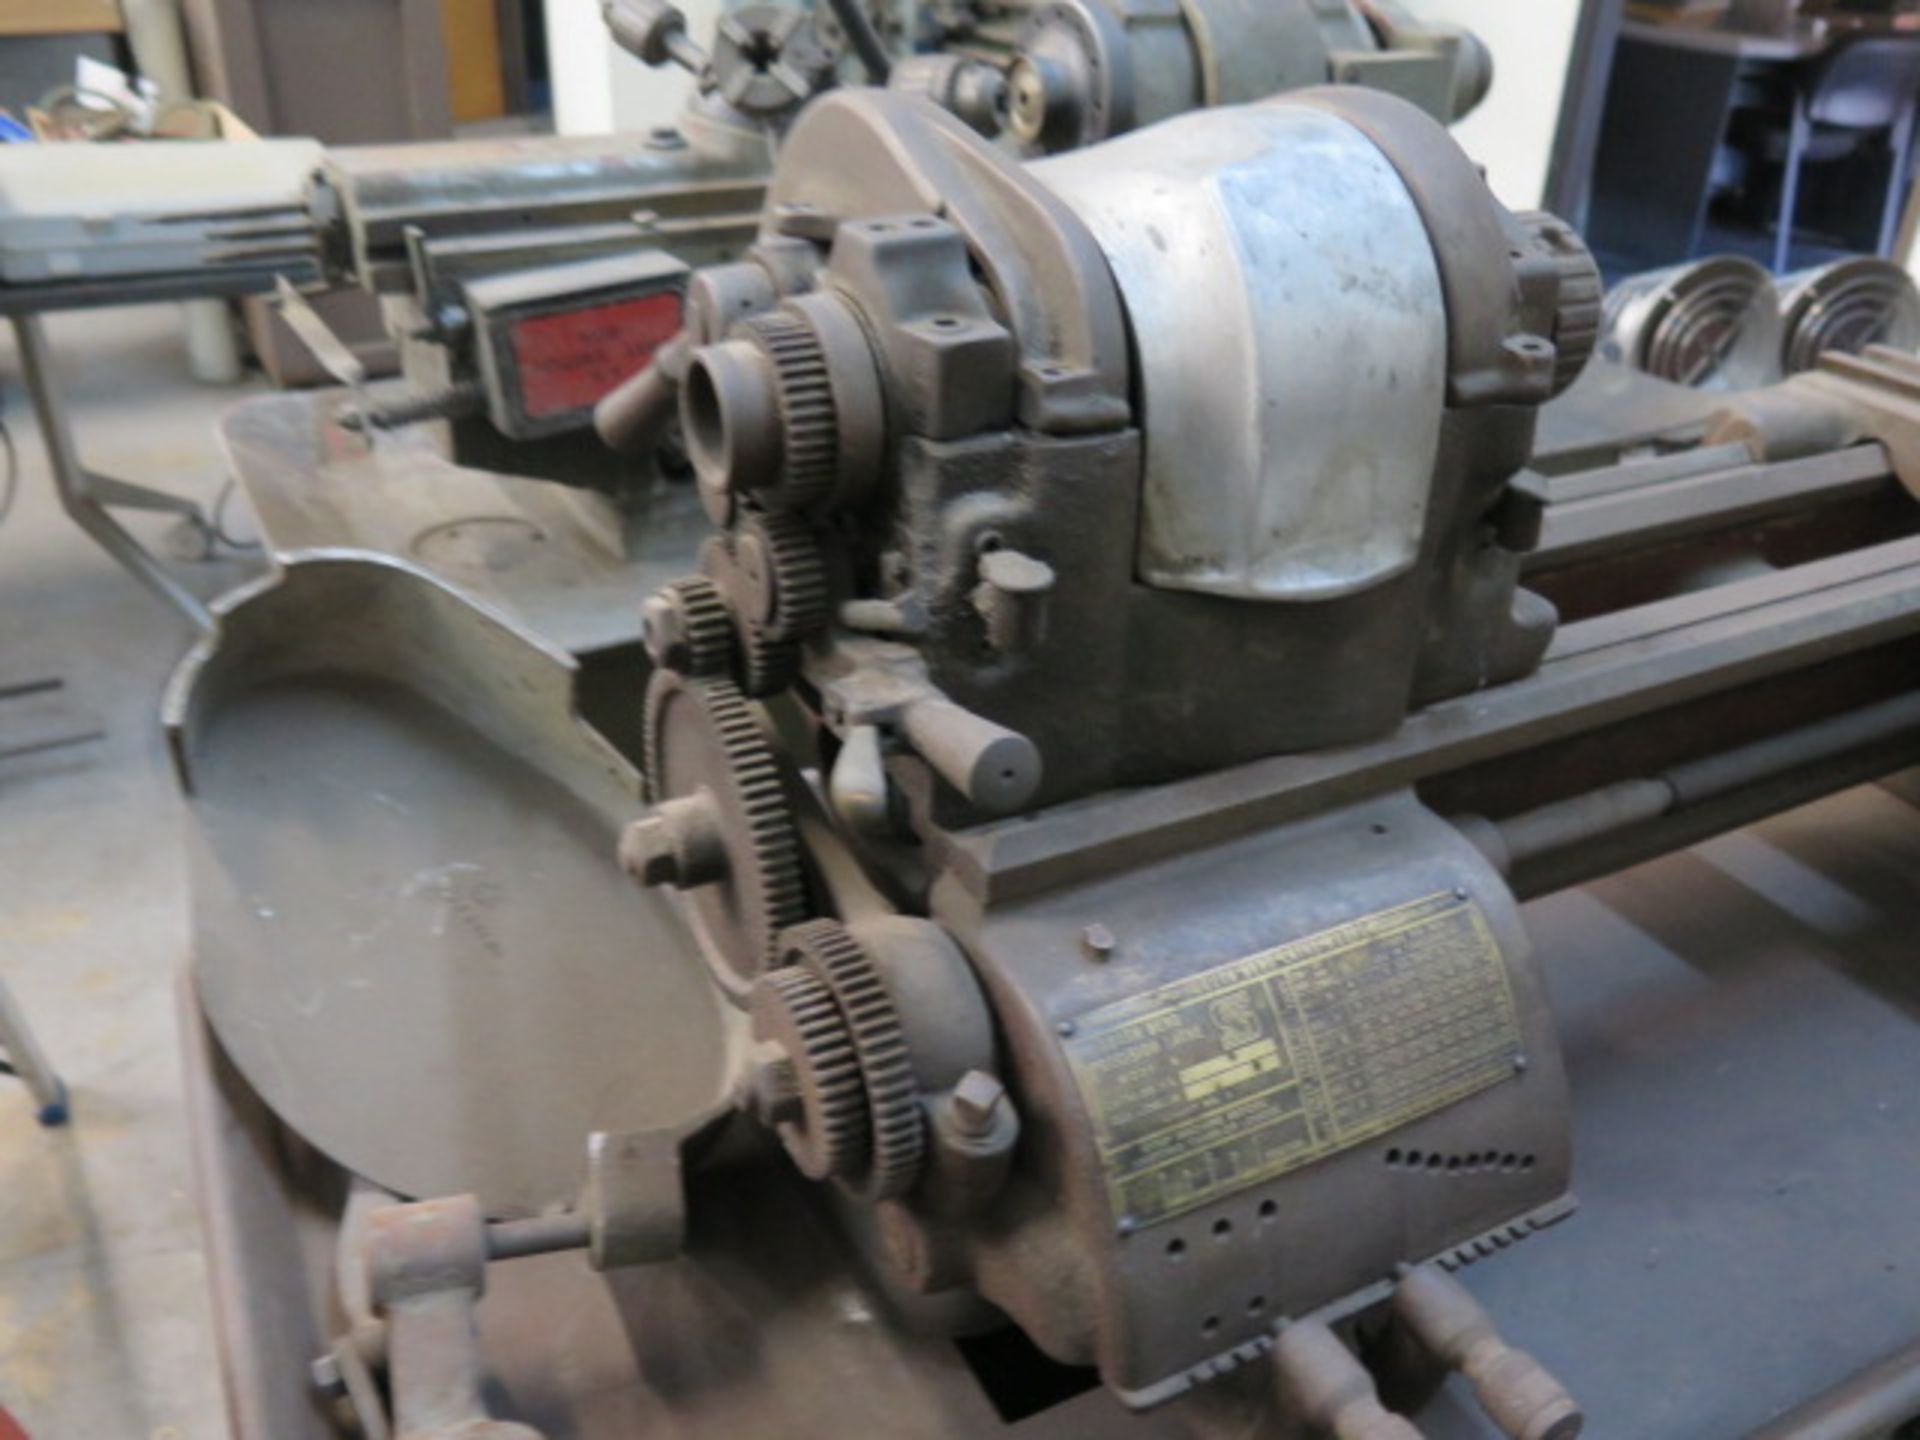 South Bend Second OP Lathe w/ Inch Threading (SOLD AS-IS - NO WARRANTY) - Image 4 of 8